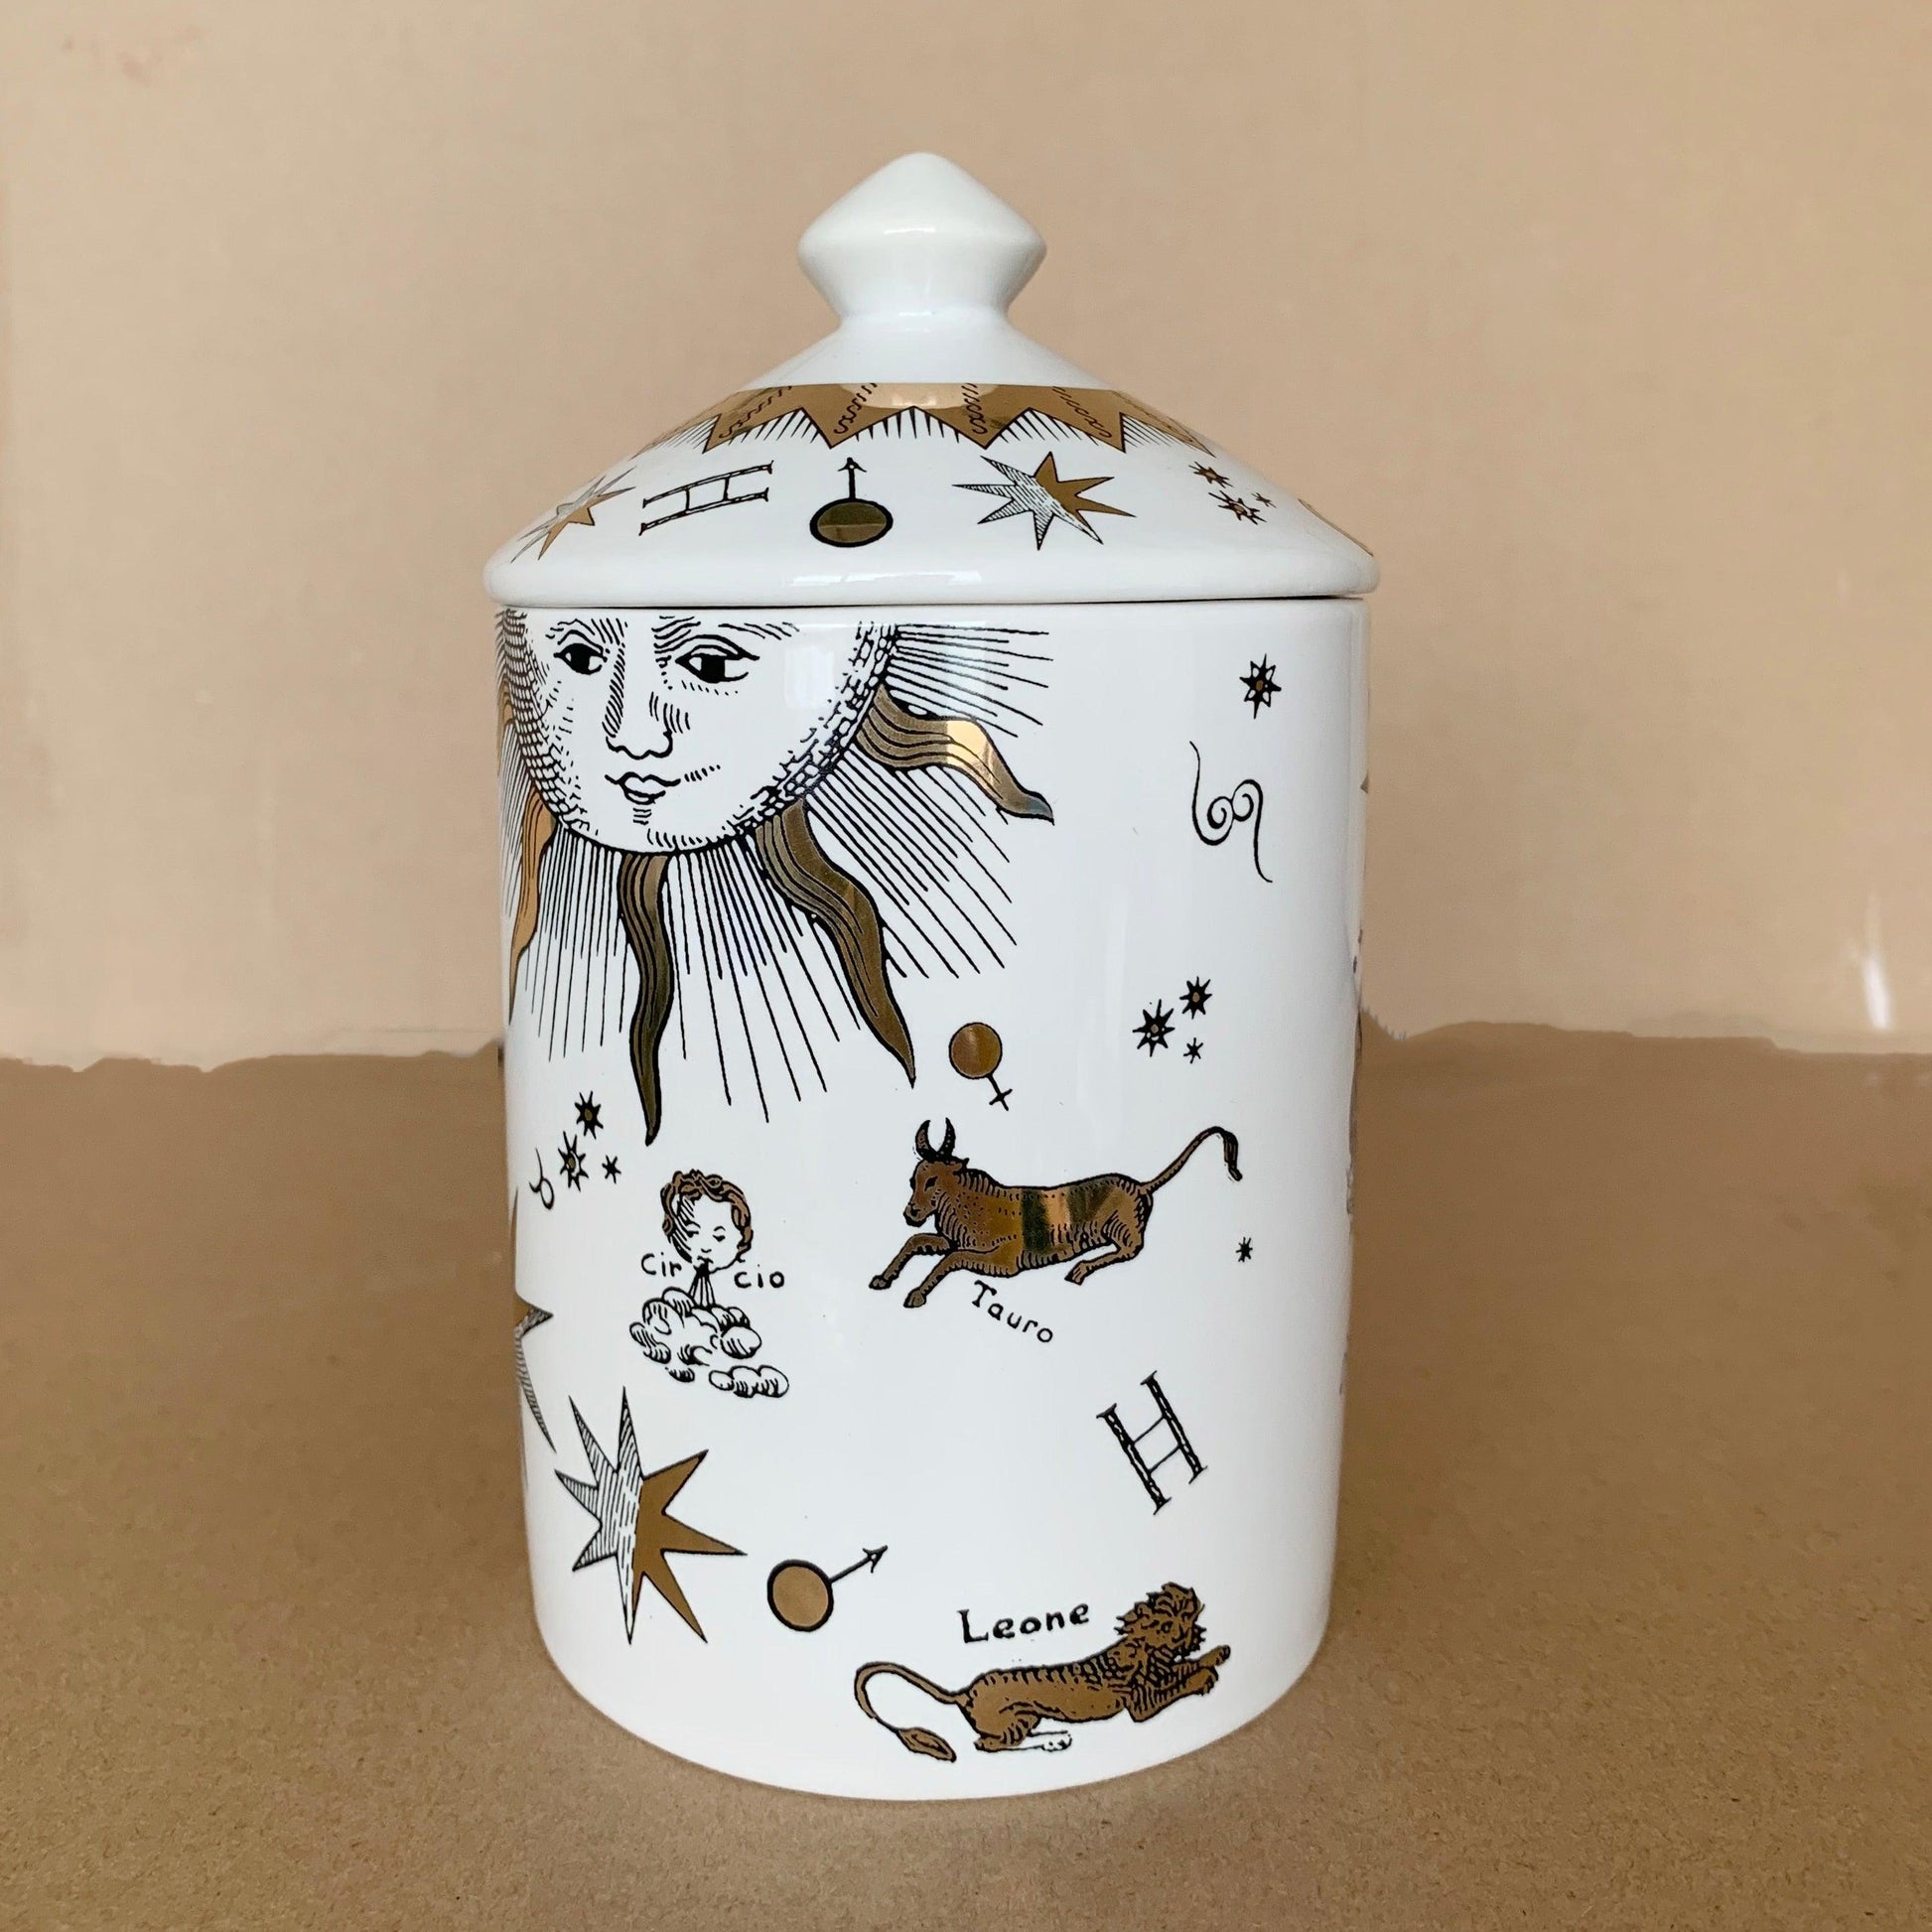 Decorative Ceramic Candle Jar with Gold Lid